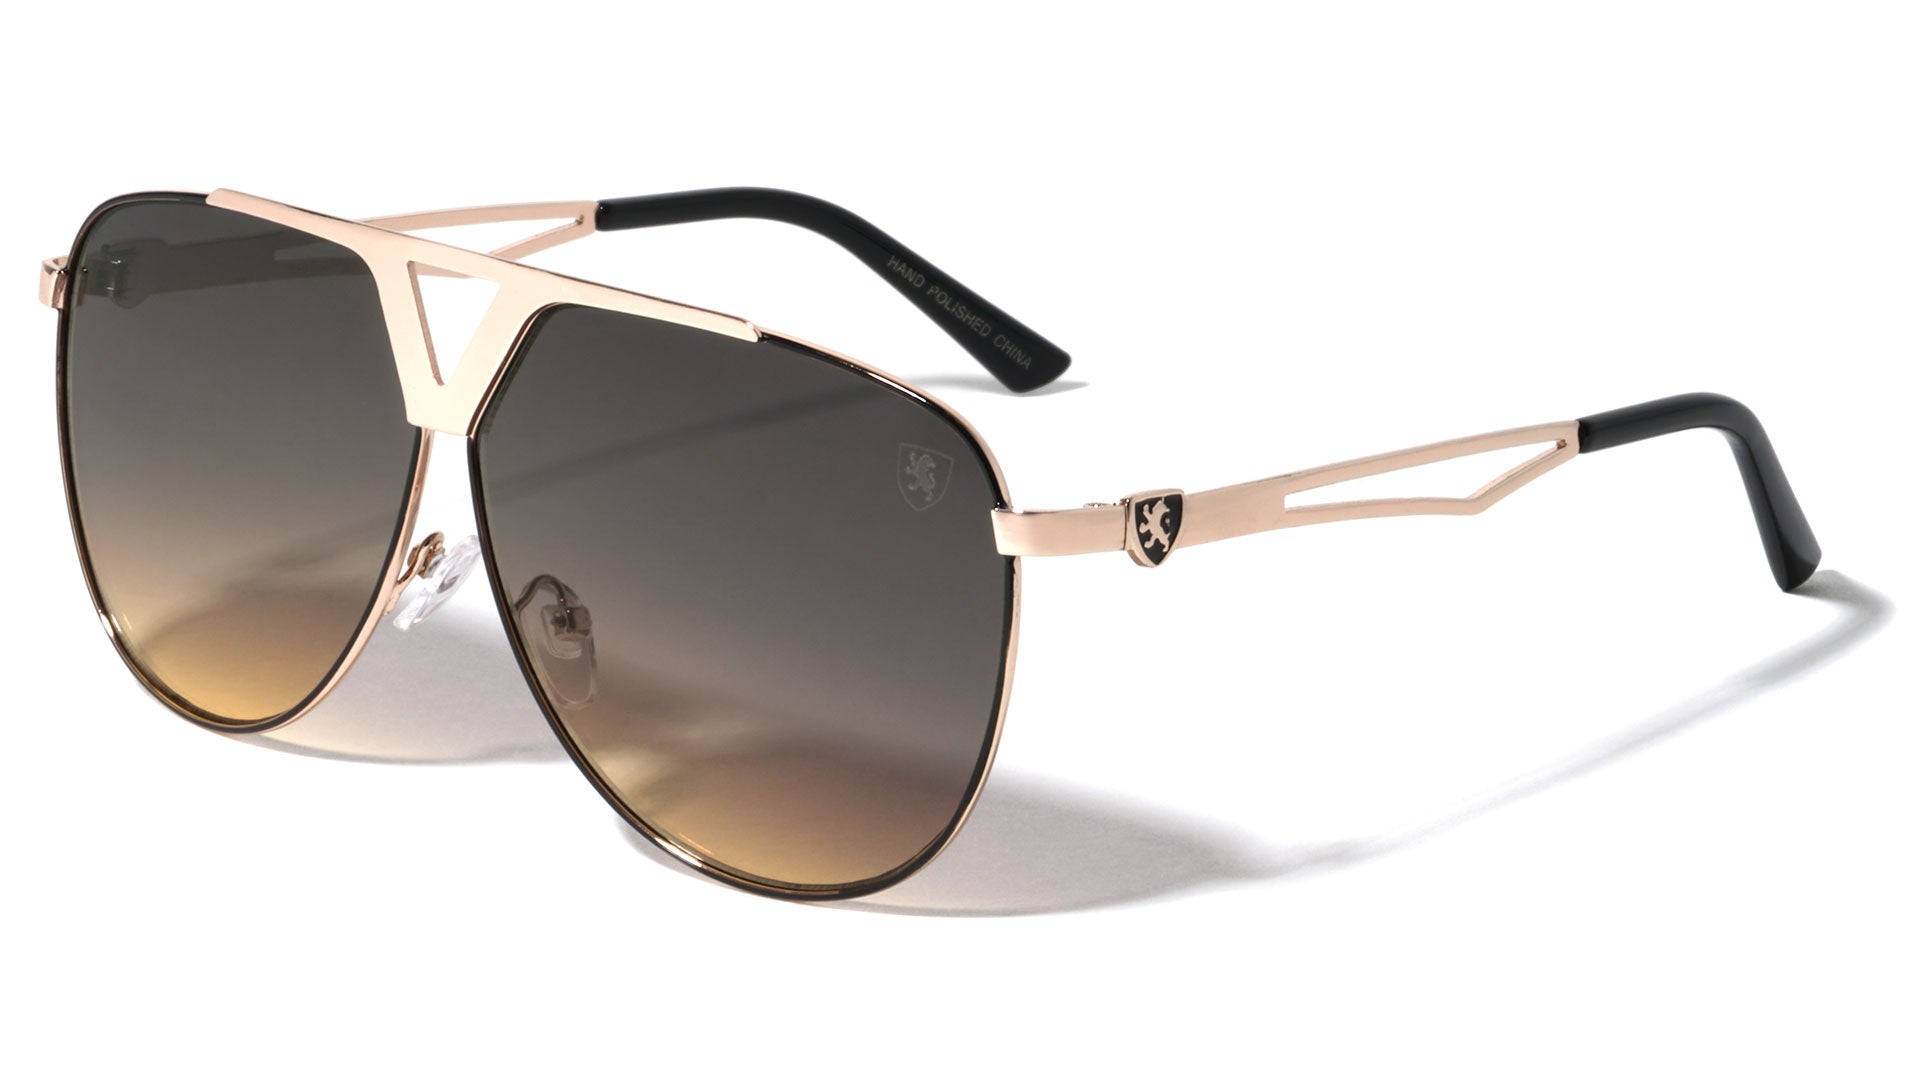 KHAN Sunglasses KN-M21038  Looking for high quality designer